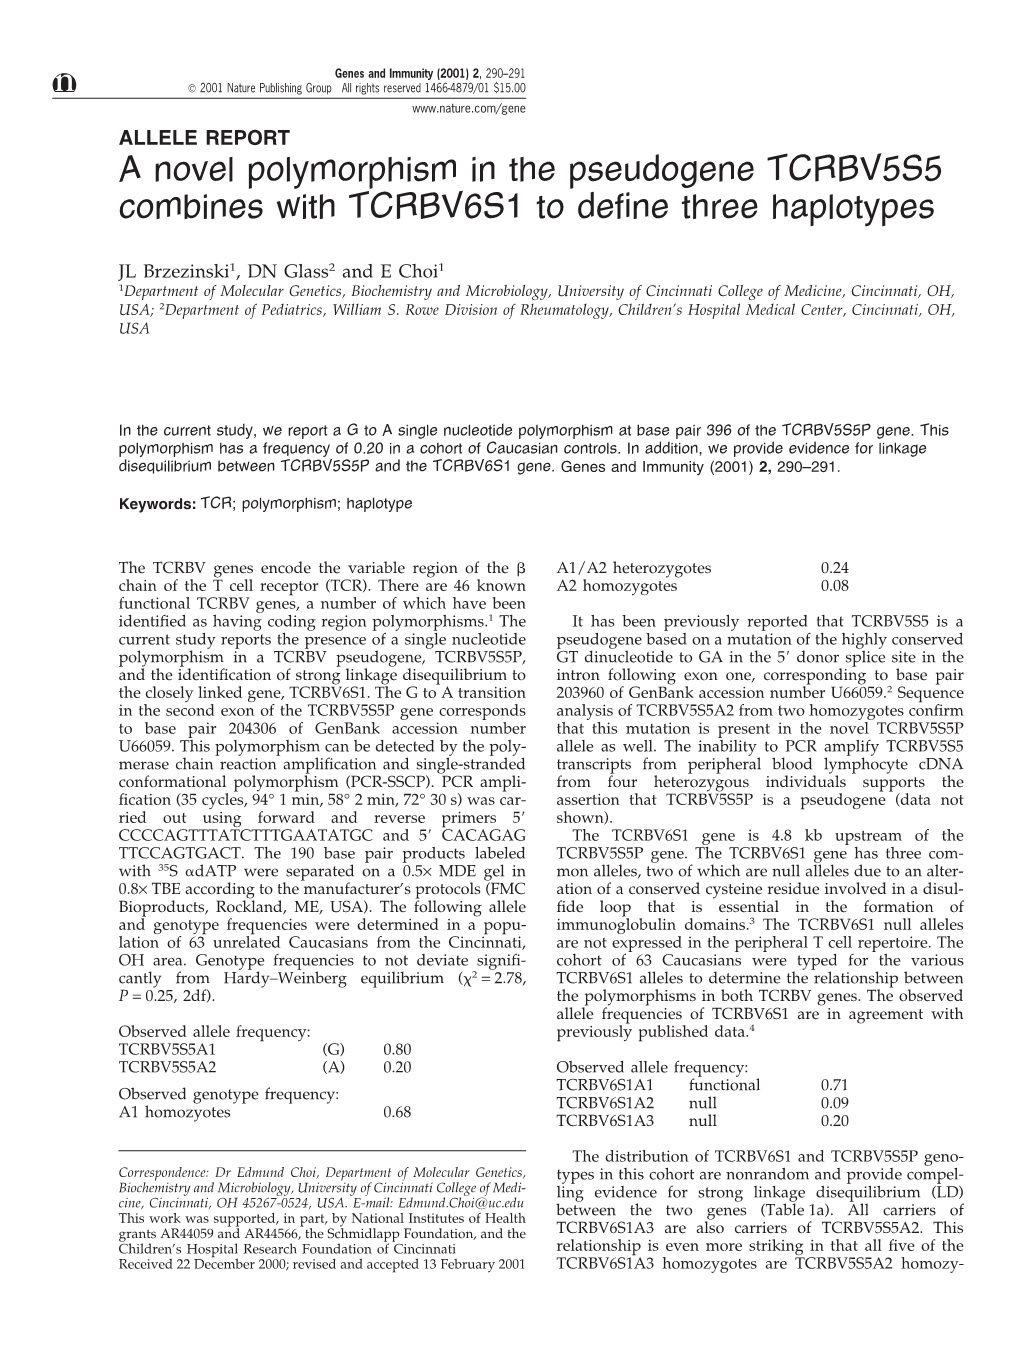 A Novel Polymorphism in the Pseudogene TCRBV5S5 Combines with TCRBV6S1 to Deﬁne Three Haplotypes